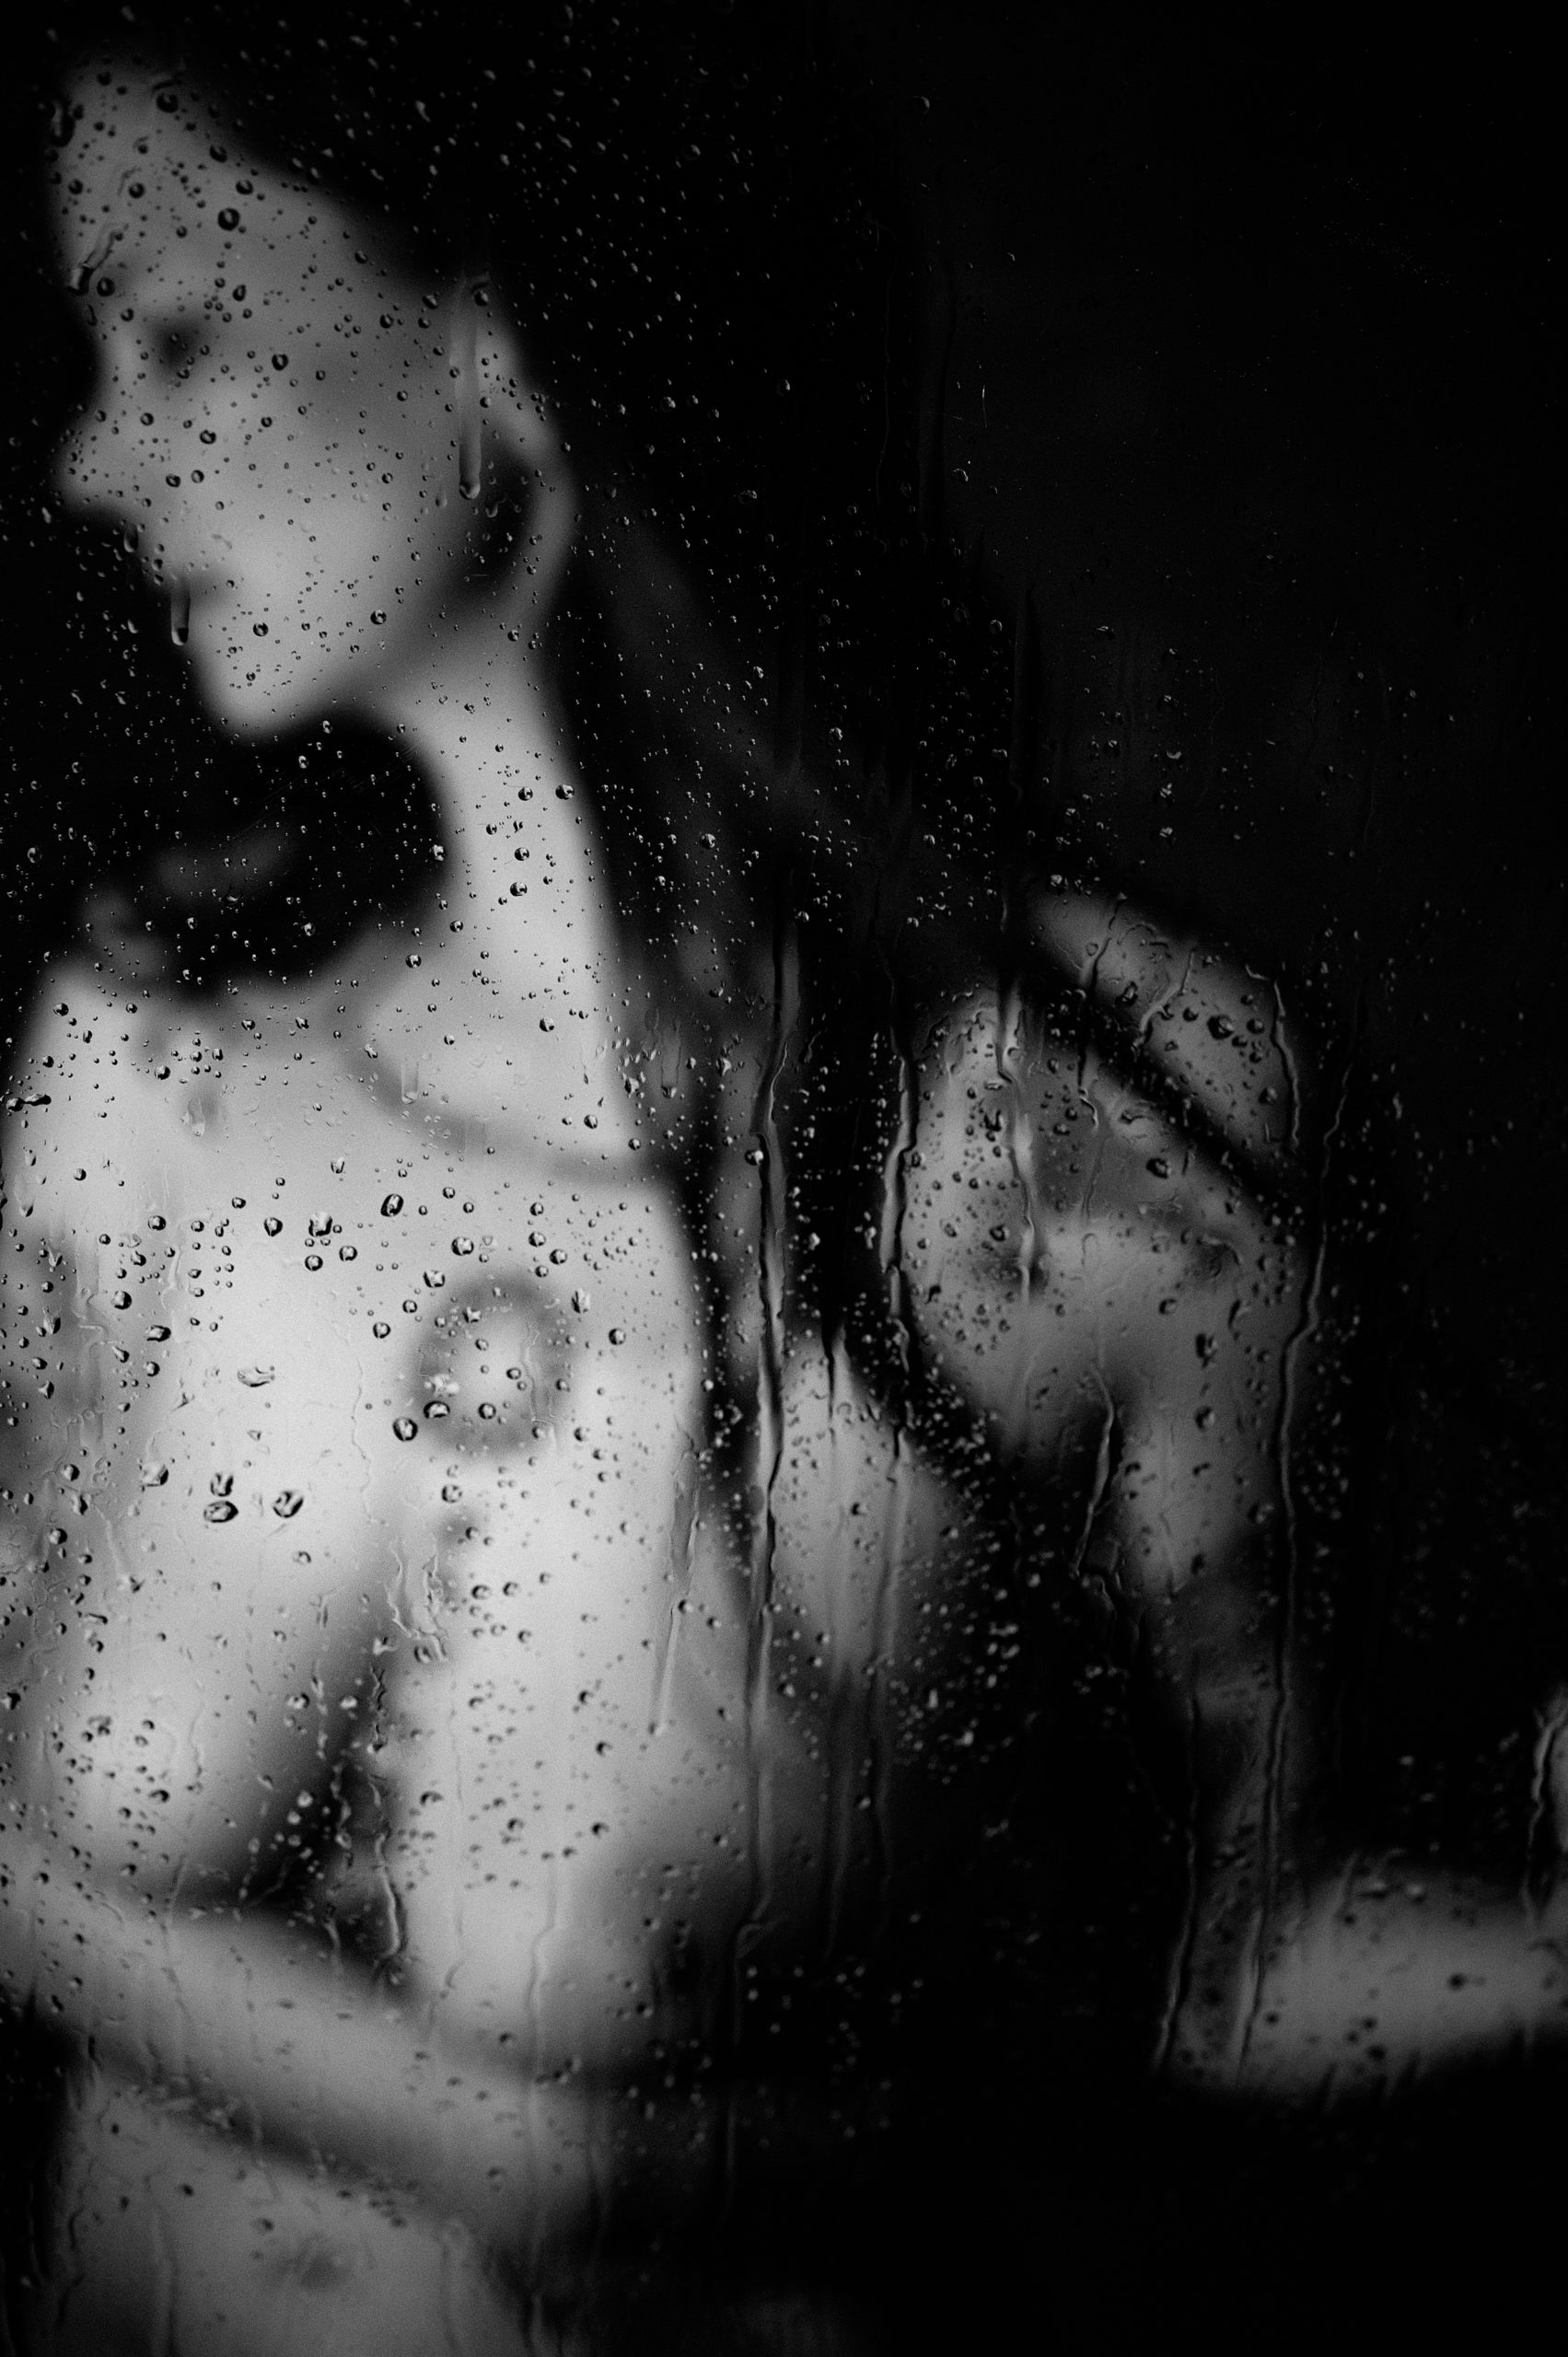 image of a woman in a boudoir session, she is in the shower. The camera is focused on the water drops on the shower door so she is slightly out of focus but you can still make out her tattoos and see that her face is turned to the left away from the camera.